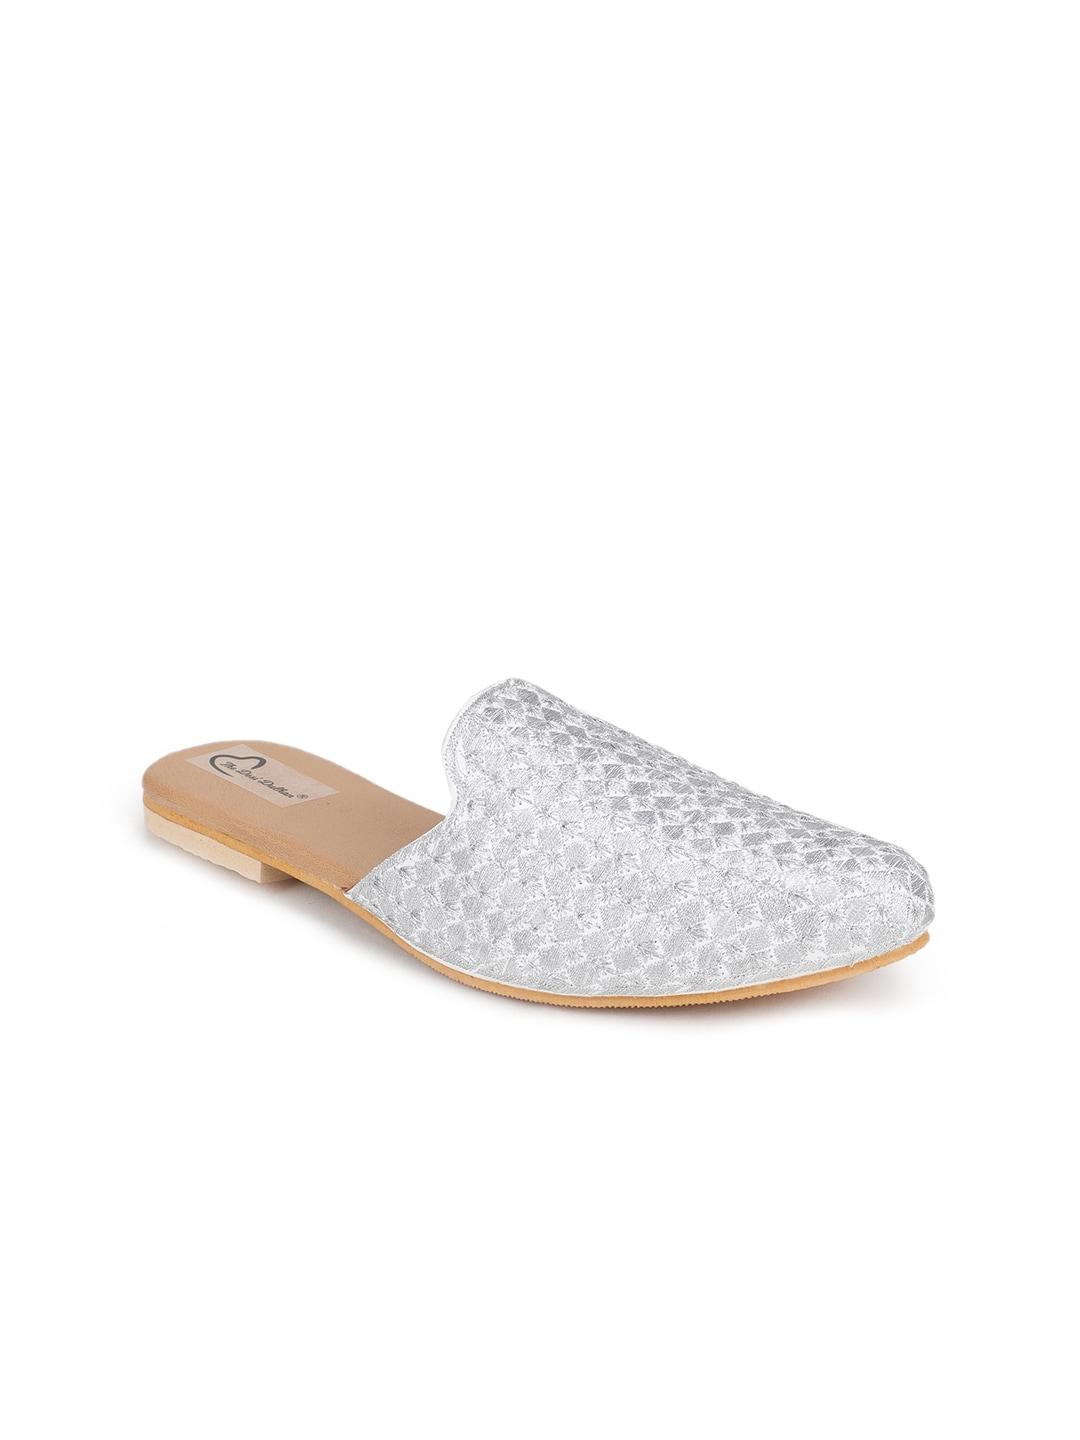 the desi dulhan women silver-toned embroidery handcrafted ethnic mules flats